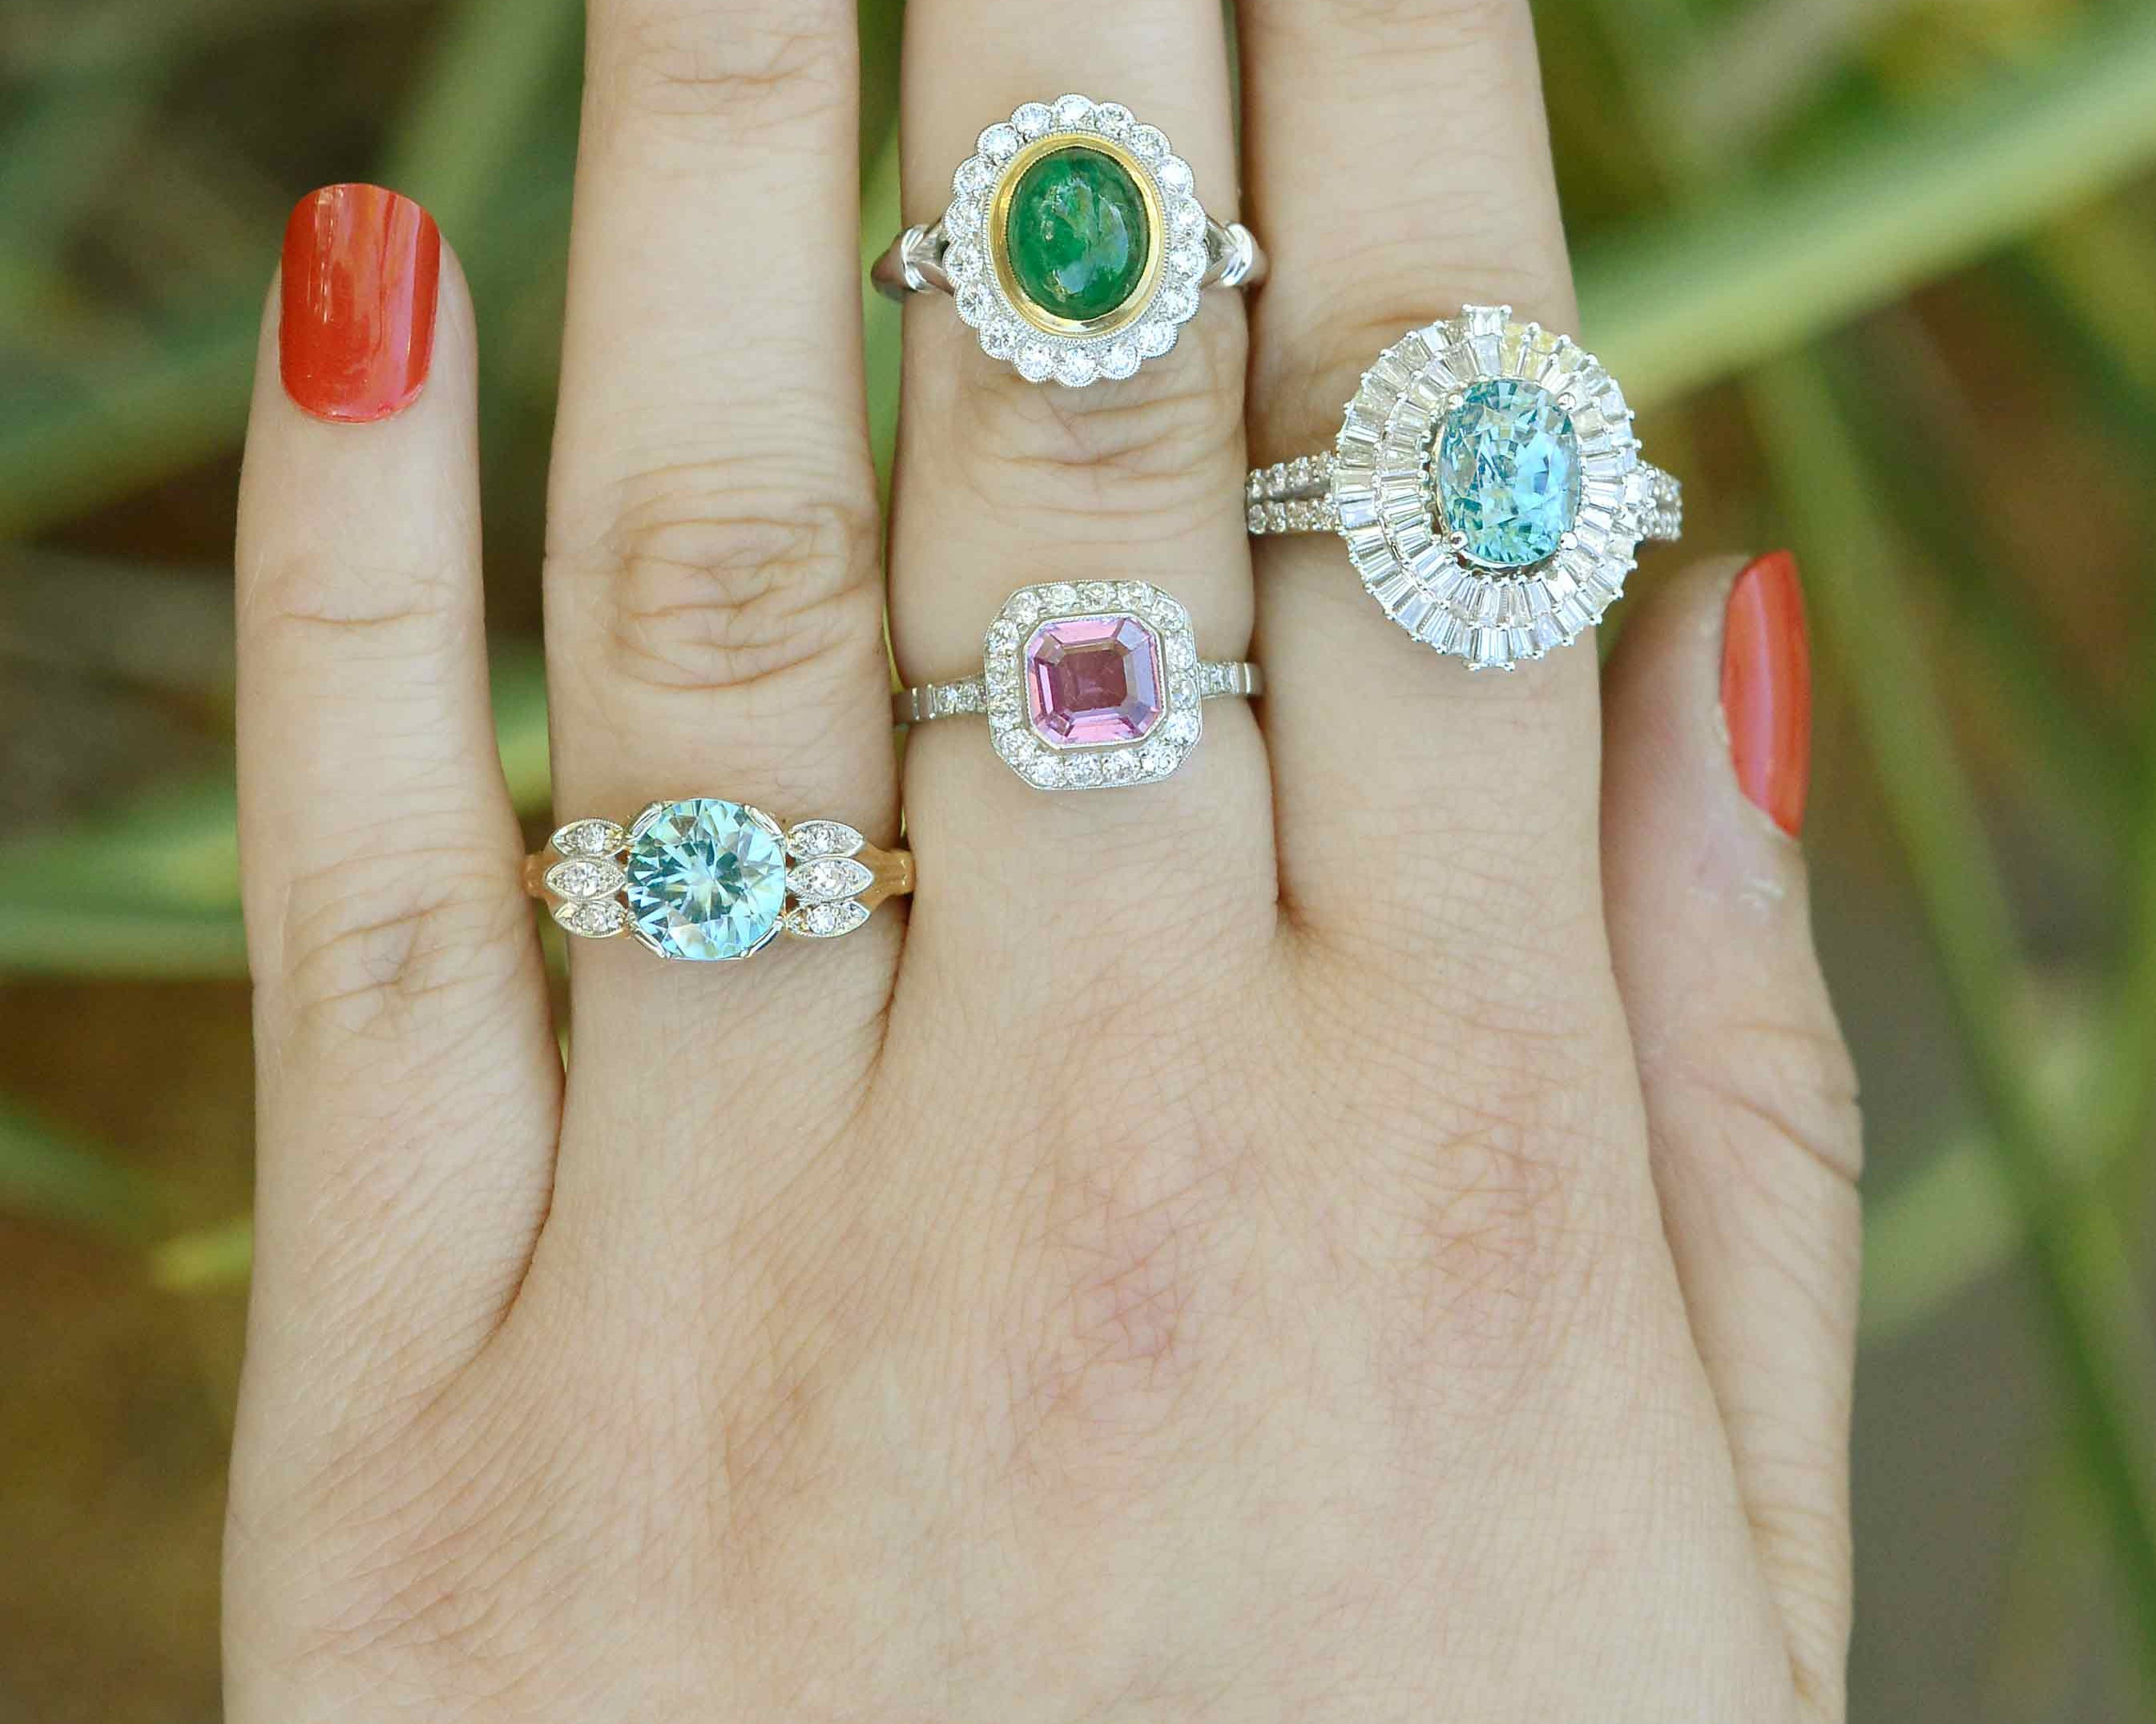 A few of our gemstone rings with the following gems; blue zircon, pink sapphire & emerald.